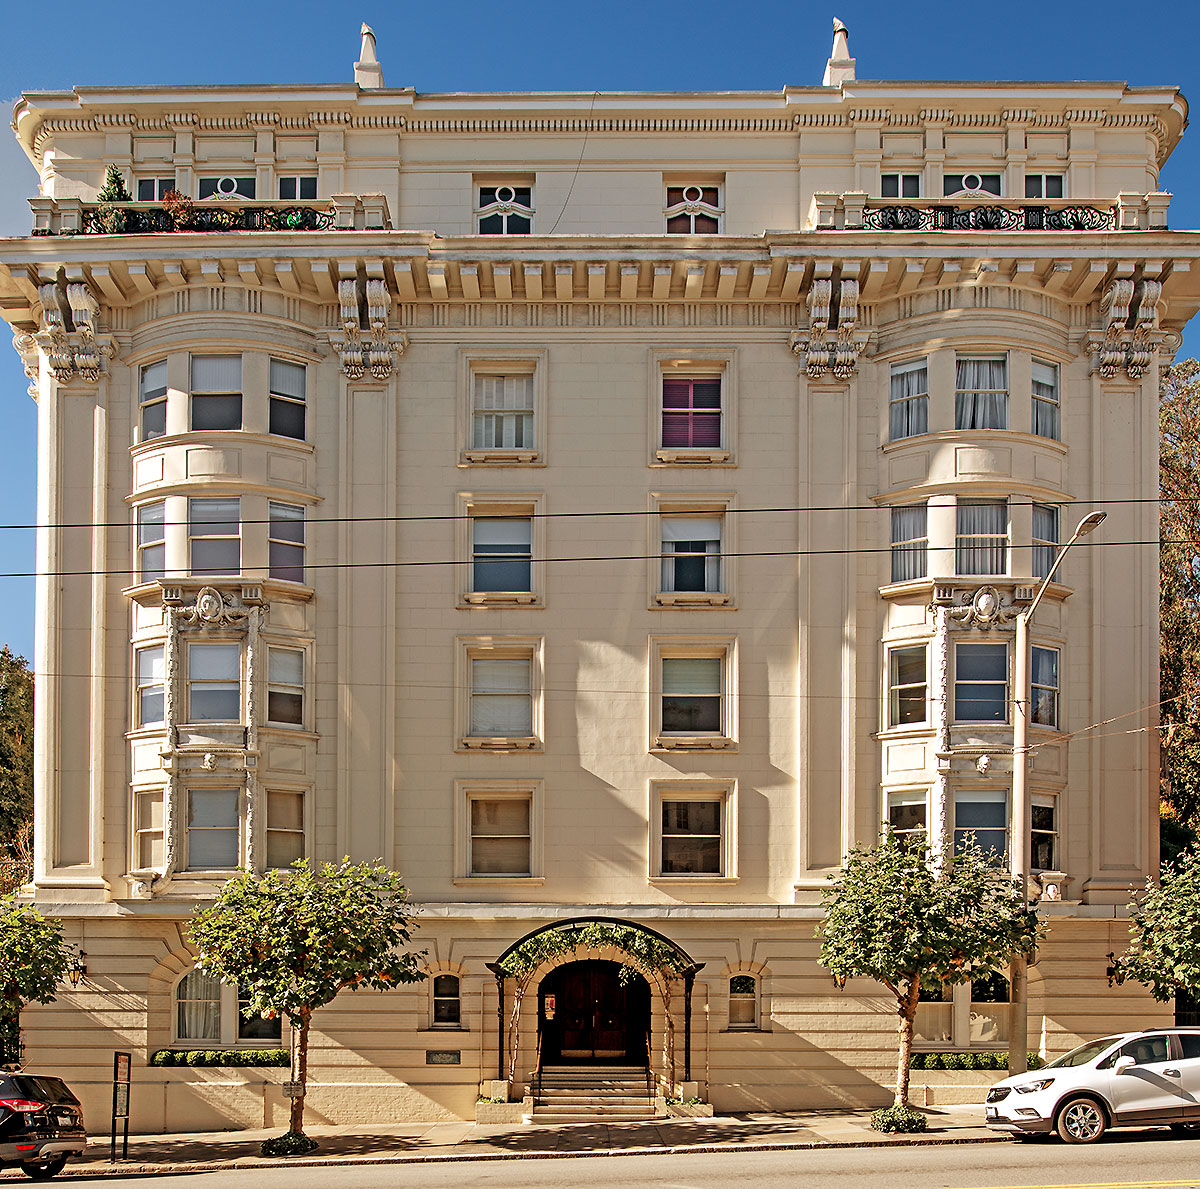 1925 Gough Street in Pacific Heights, designed by Conrad Meussdorffer, built 1908